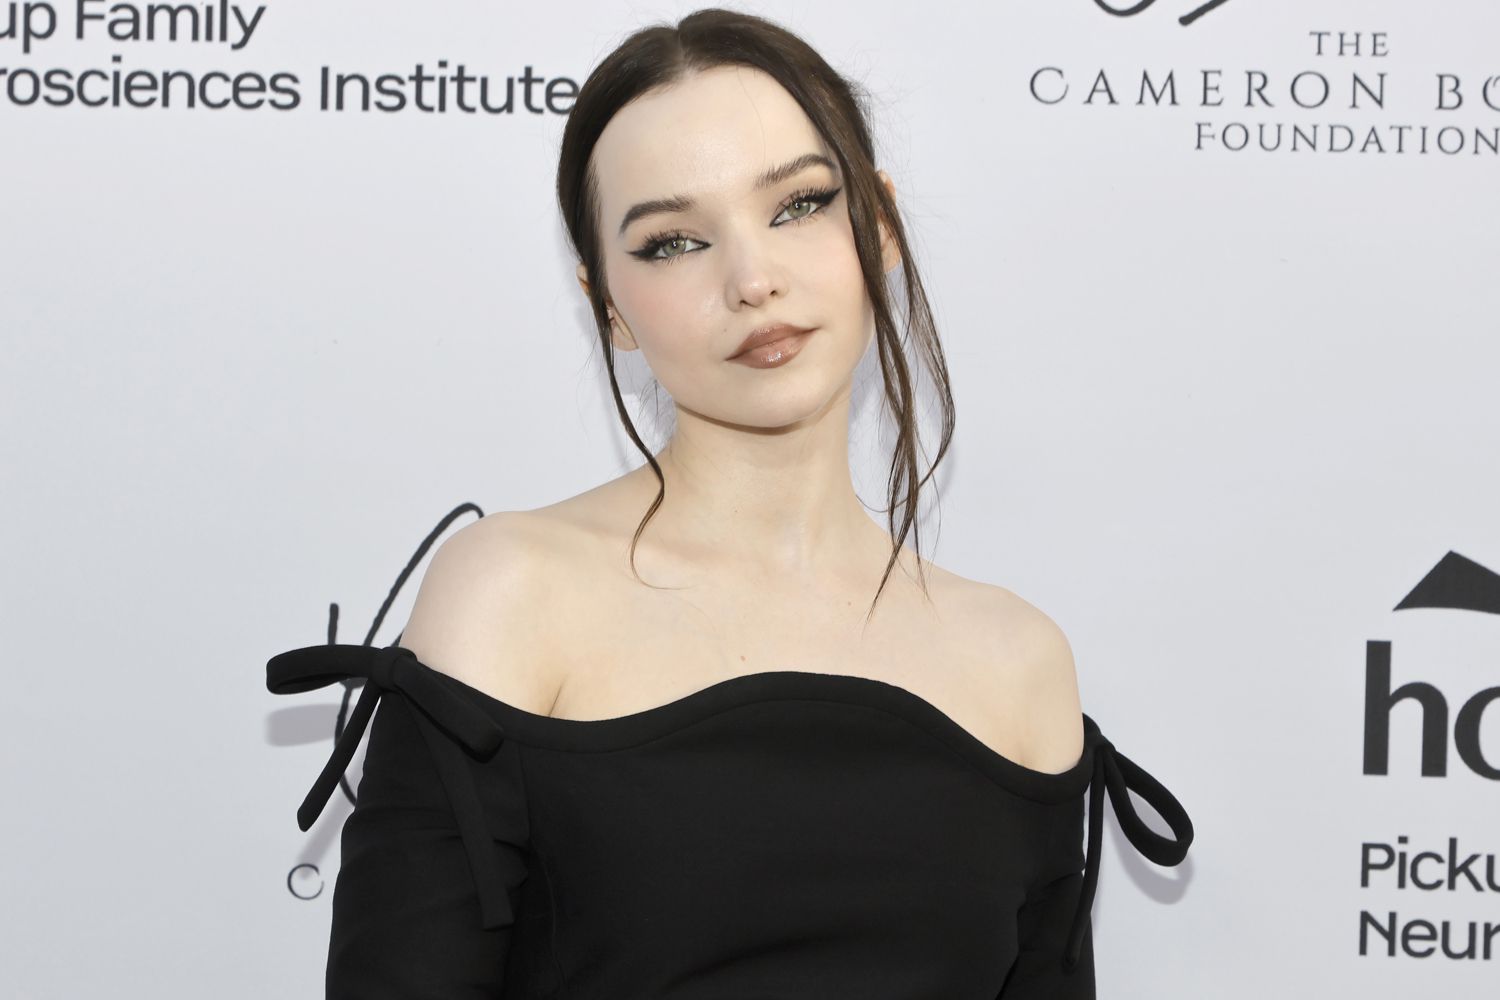 Dove Cameron attends the Cameron Boyce Foundation's Cam For A Cause Inaugural Gala